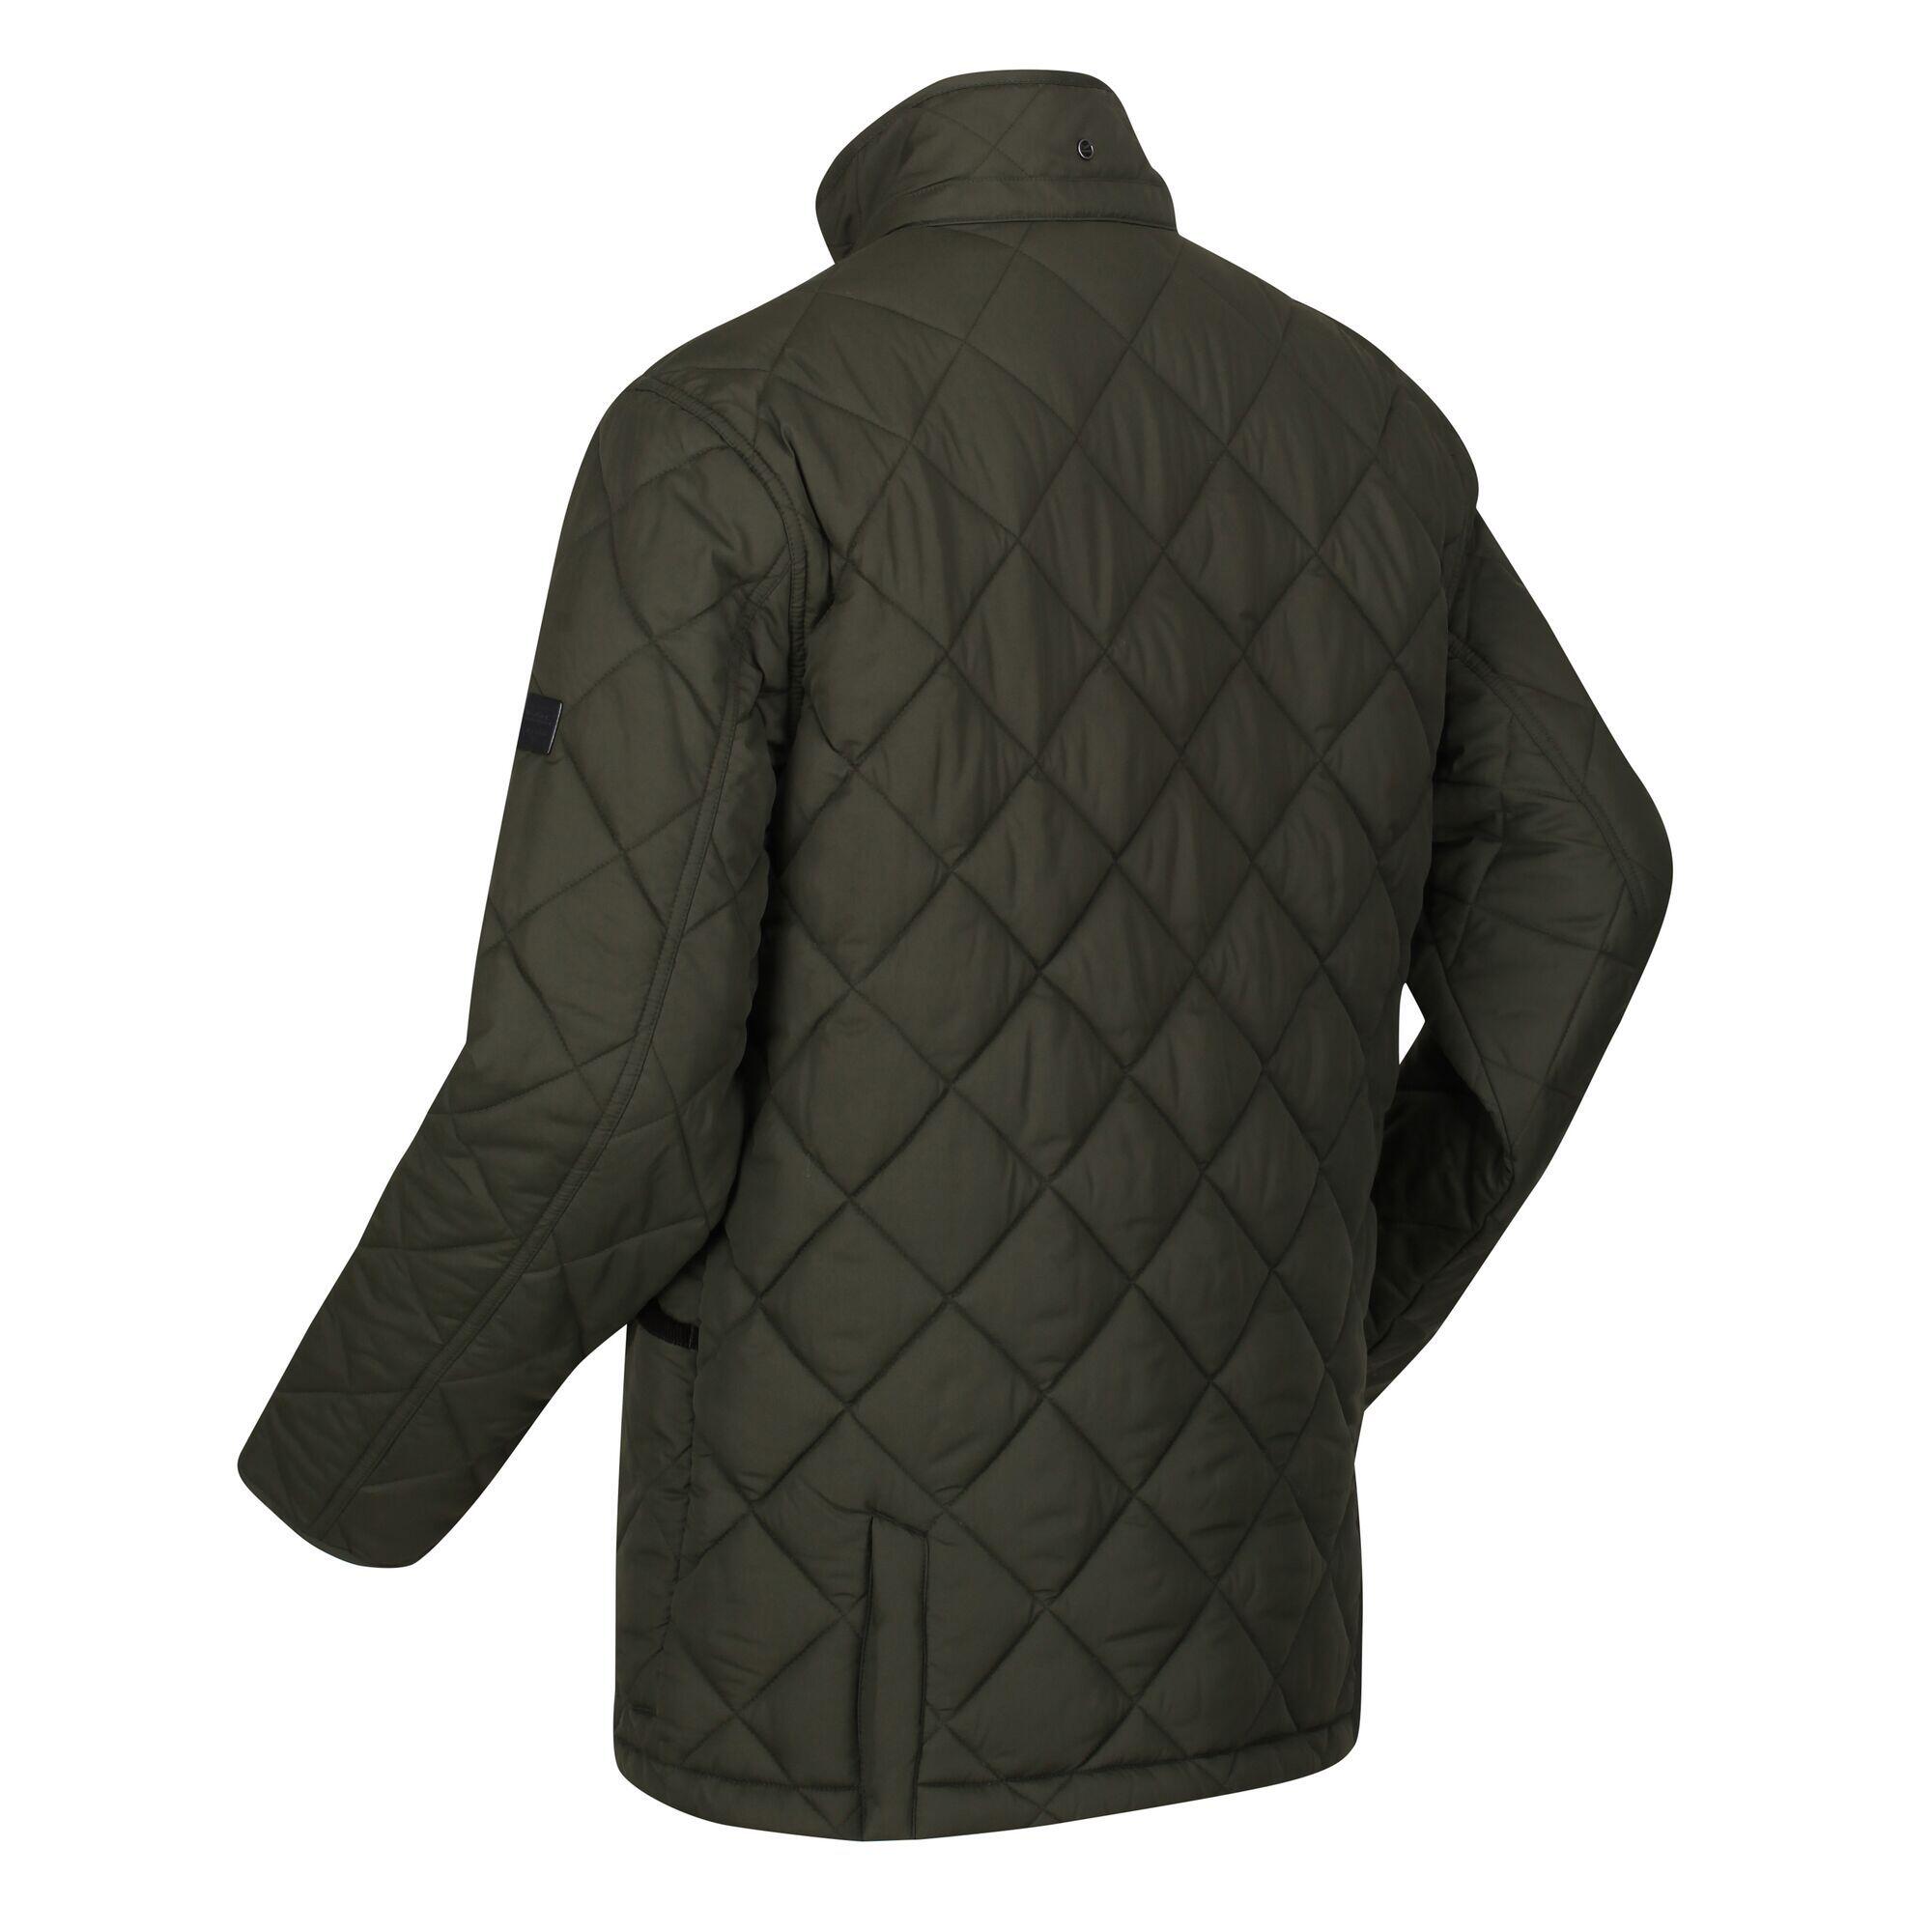 Mens Londyn Quilted Insulated Jacket (Dark Khaki) 4/5